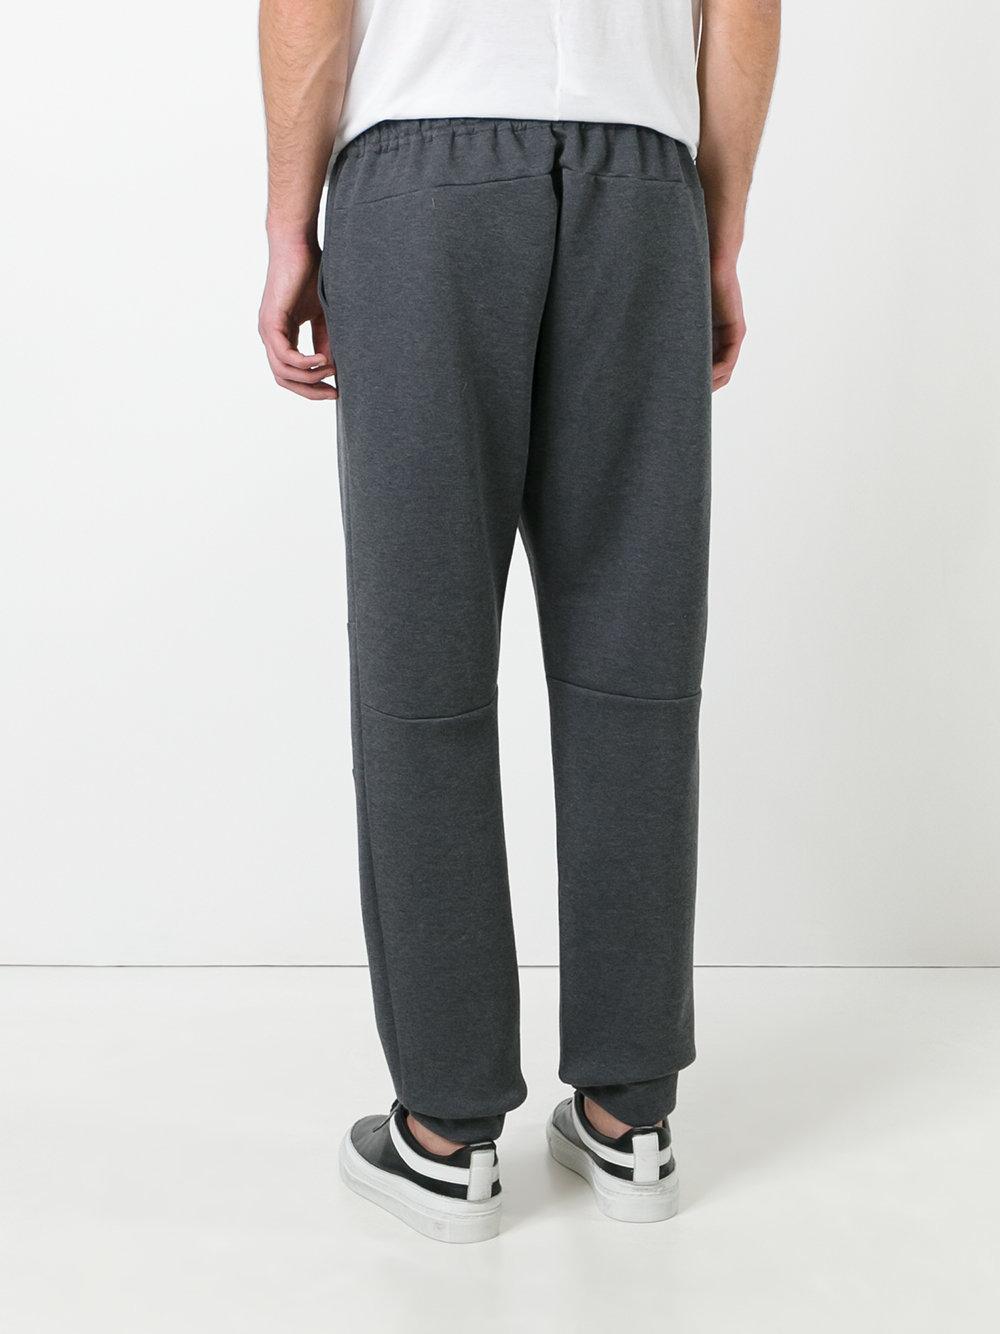 Lyst - Fendi Loose Fit Cuffed Joggers in Gray for Men